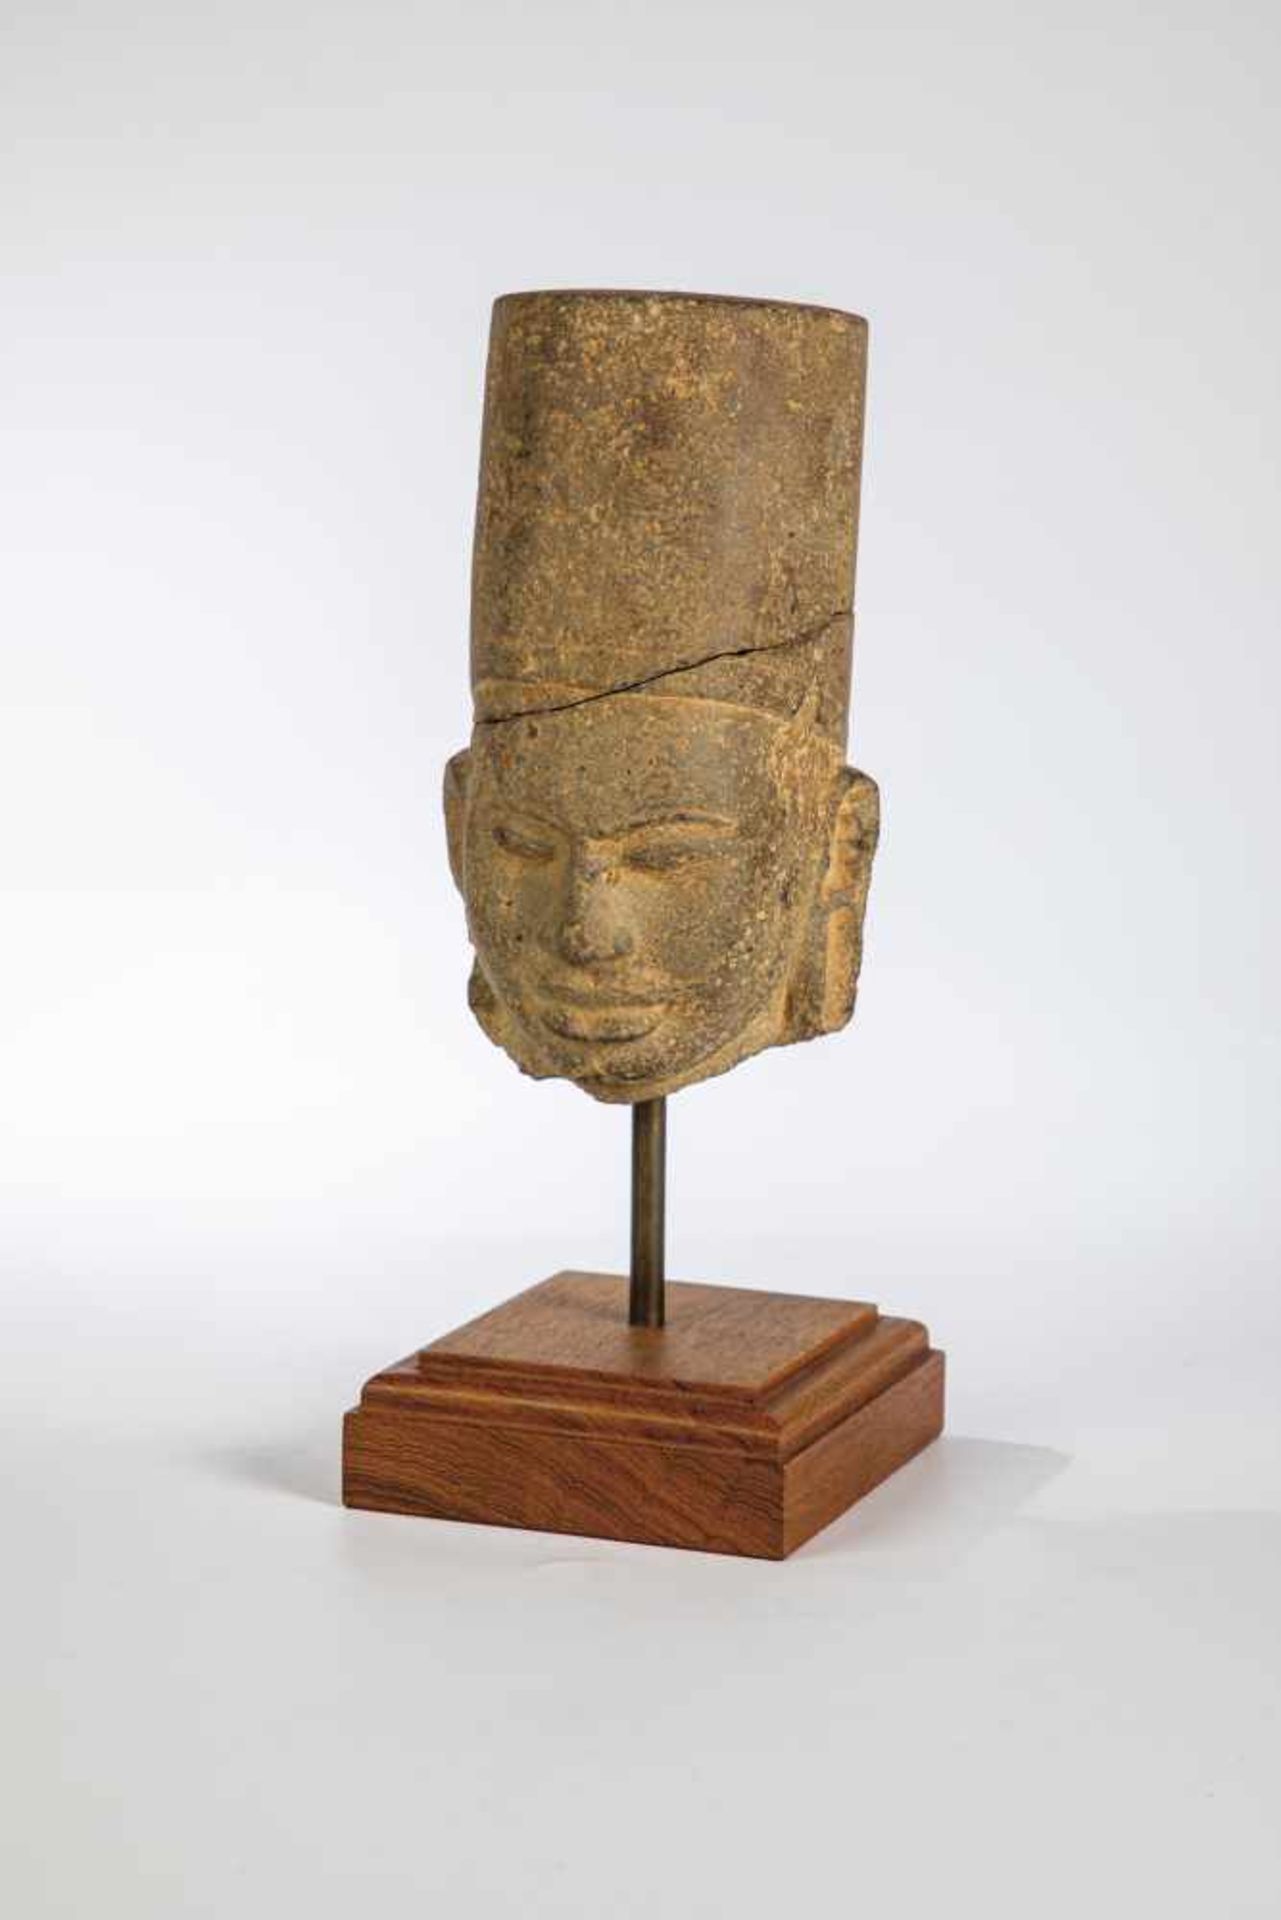 Vishnu-head. Prekhmer, 7./8. century. Face with slightly curved brows, almond-shaped eyes,a broad